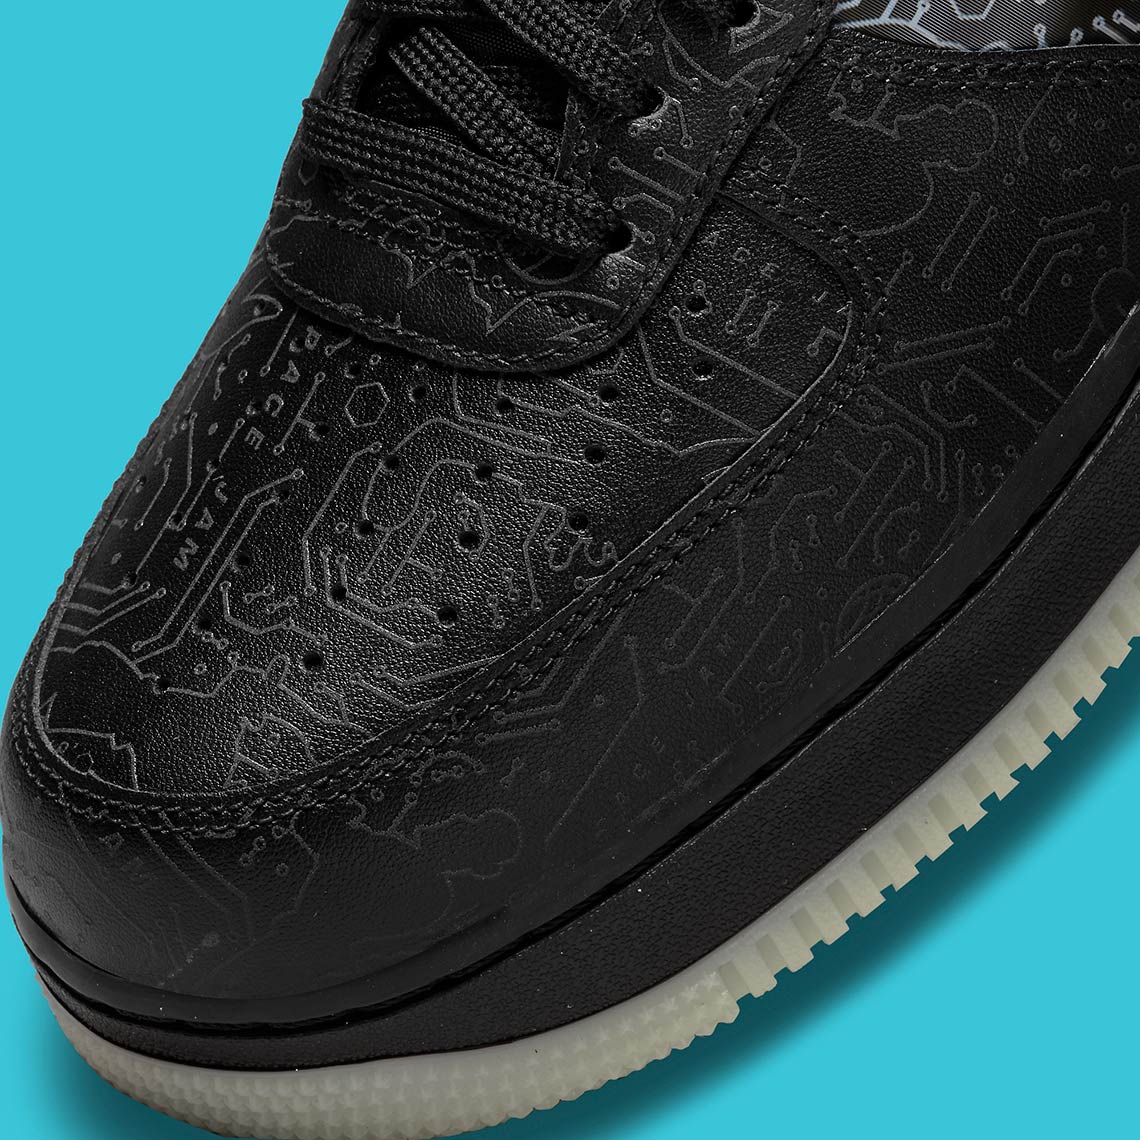 Space Jam Nike Air Force 1 Computer Chip Dh5354 001 7